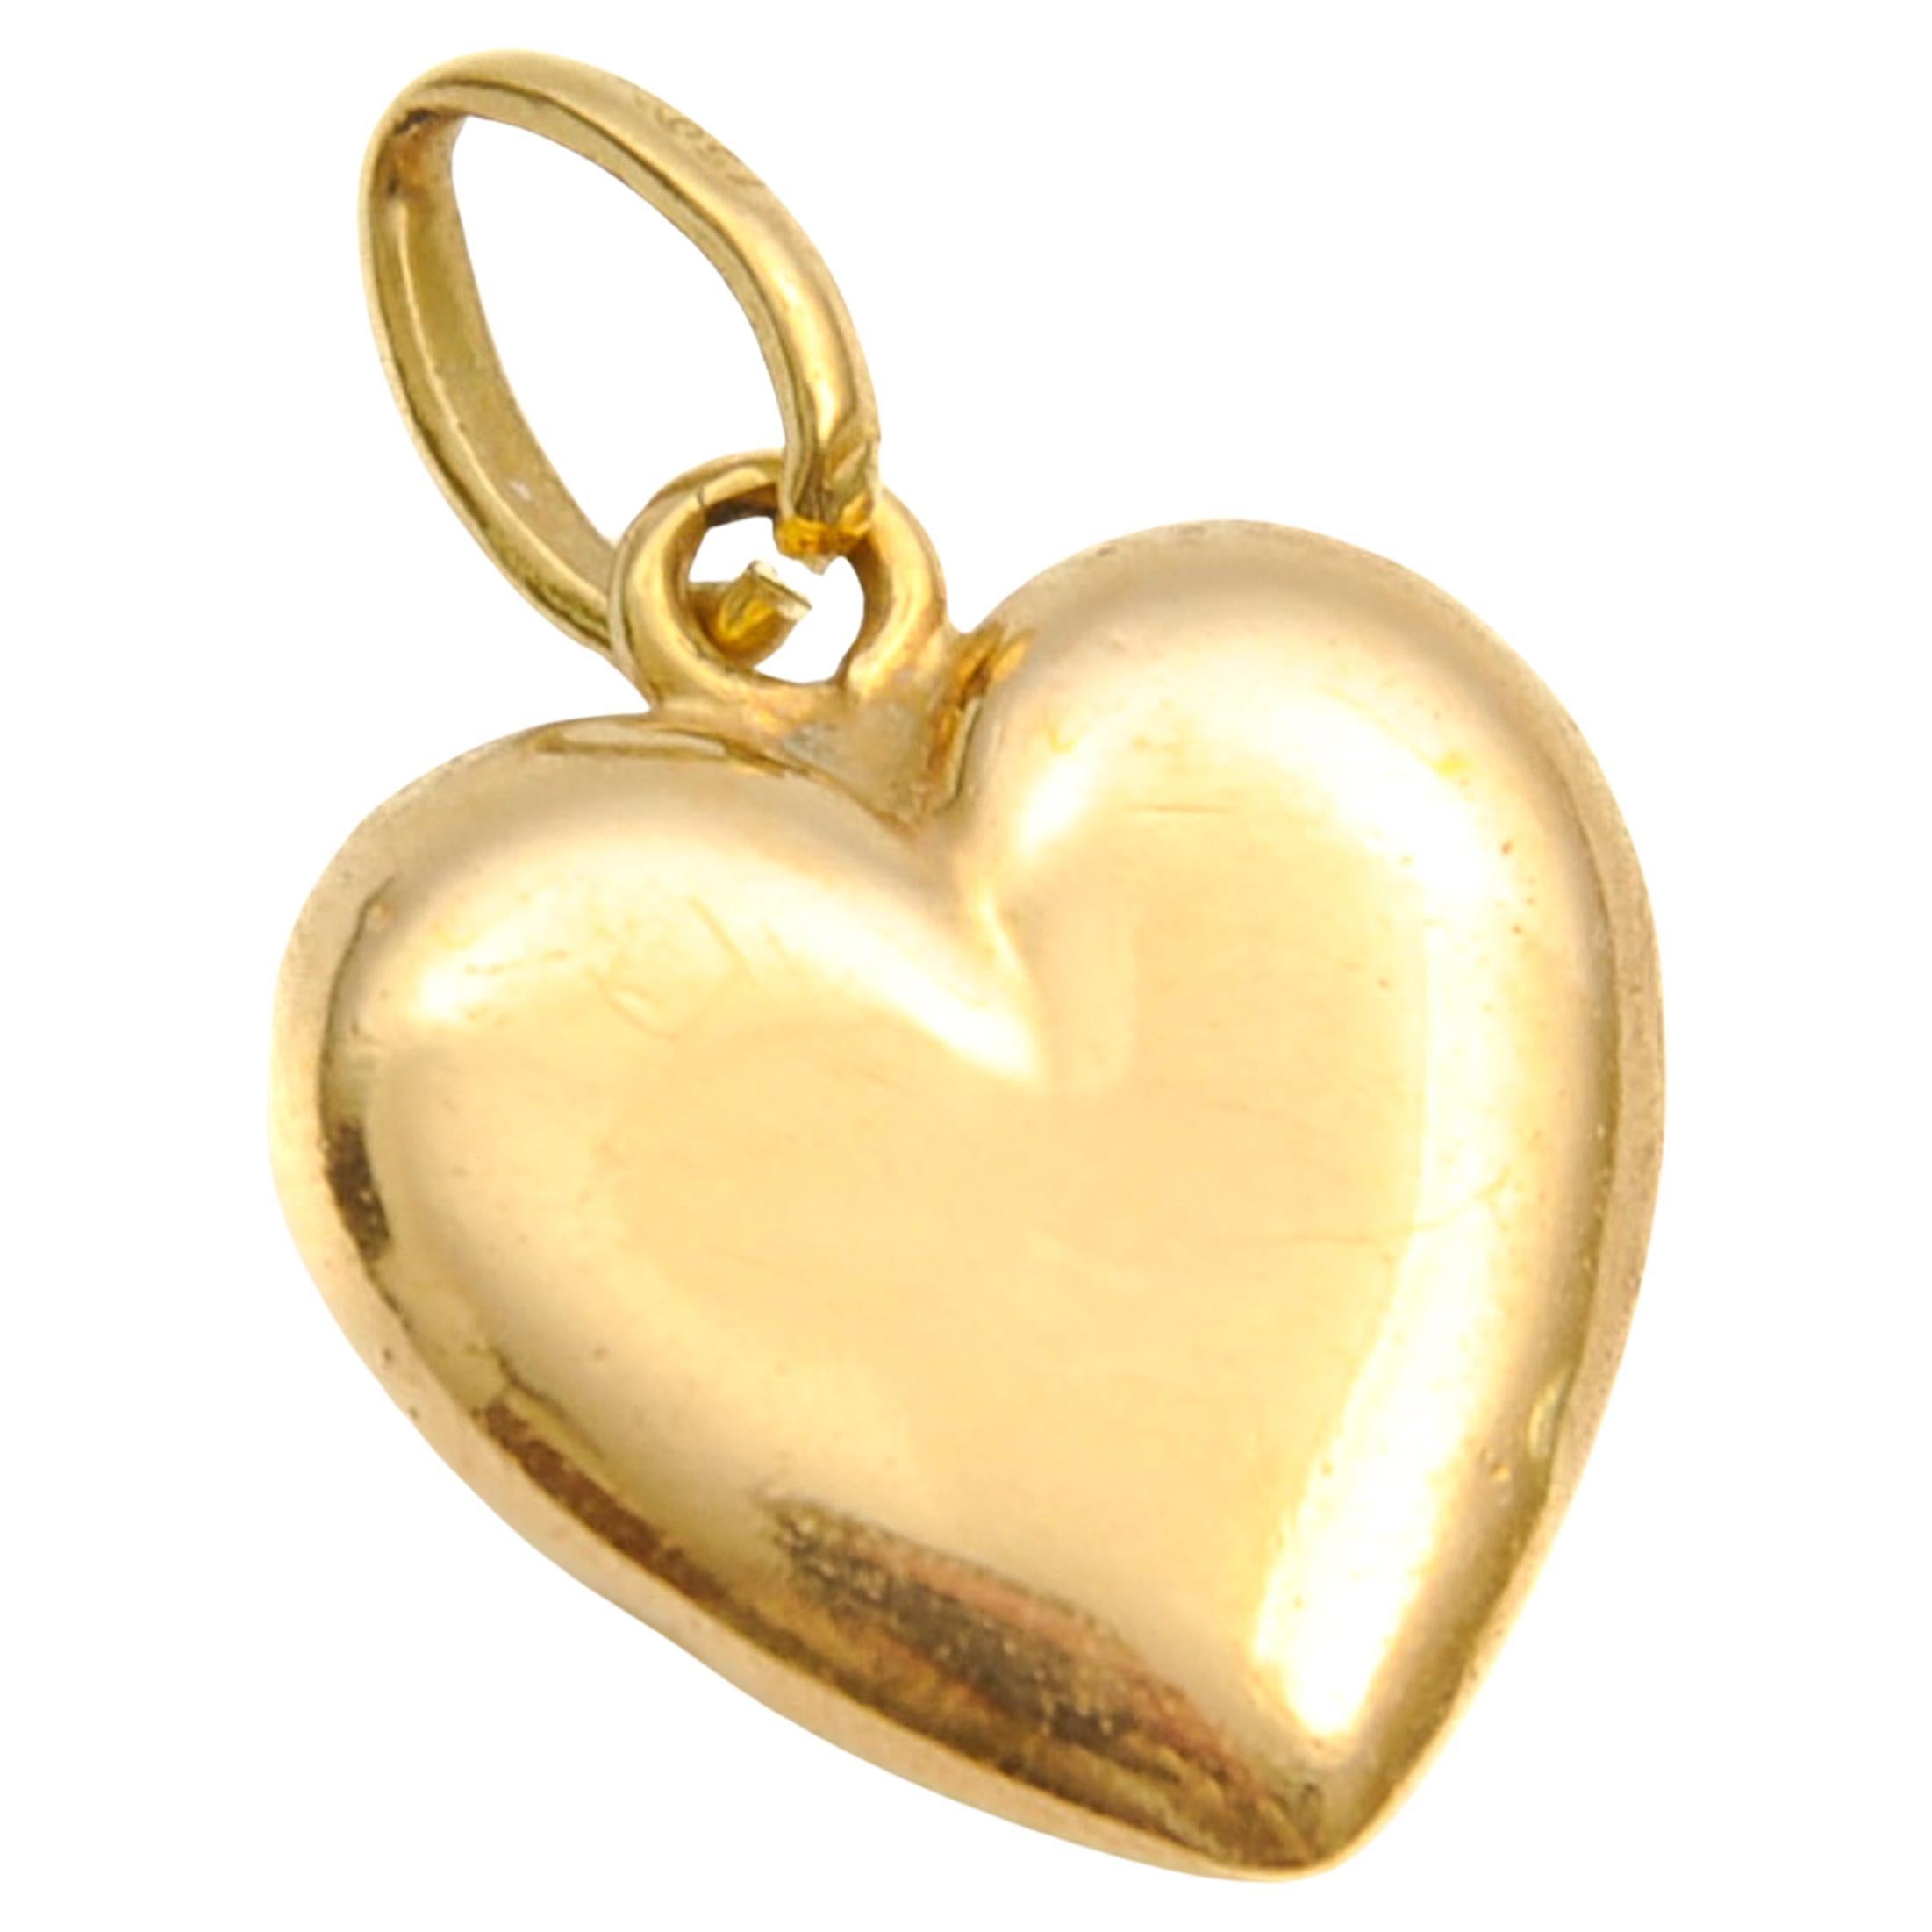 Rainbow Heart Charms - Puffy Heart Balloon Enamel Charms - Gold Heart  Charms for Jewelry Making - Set of 8